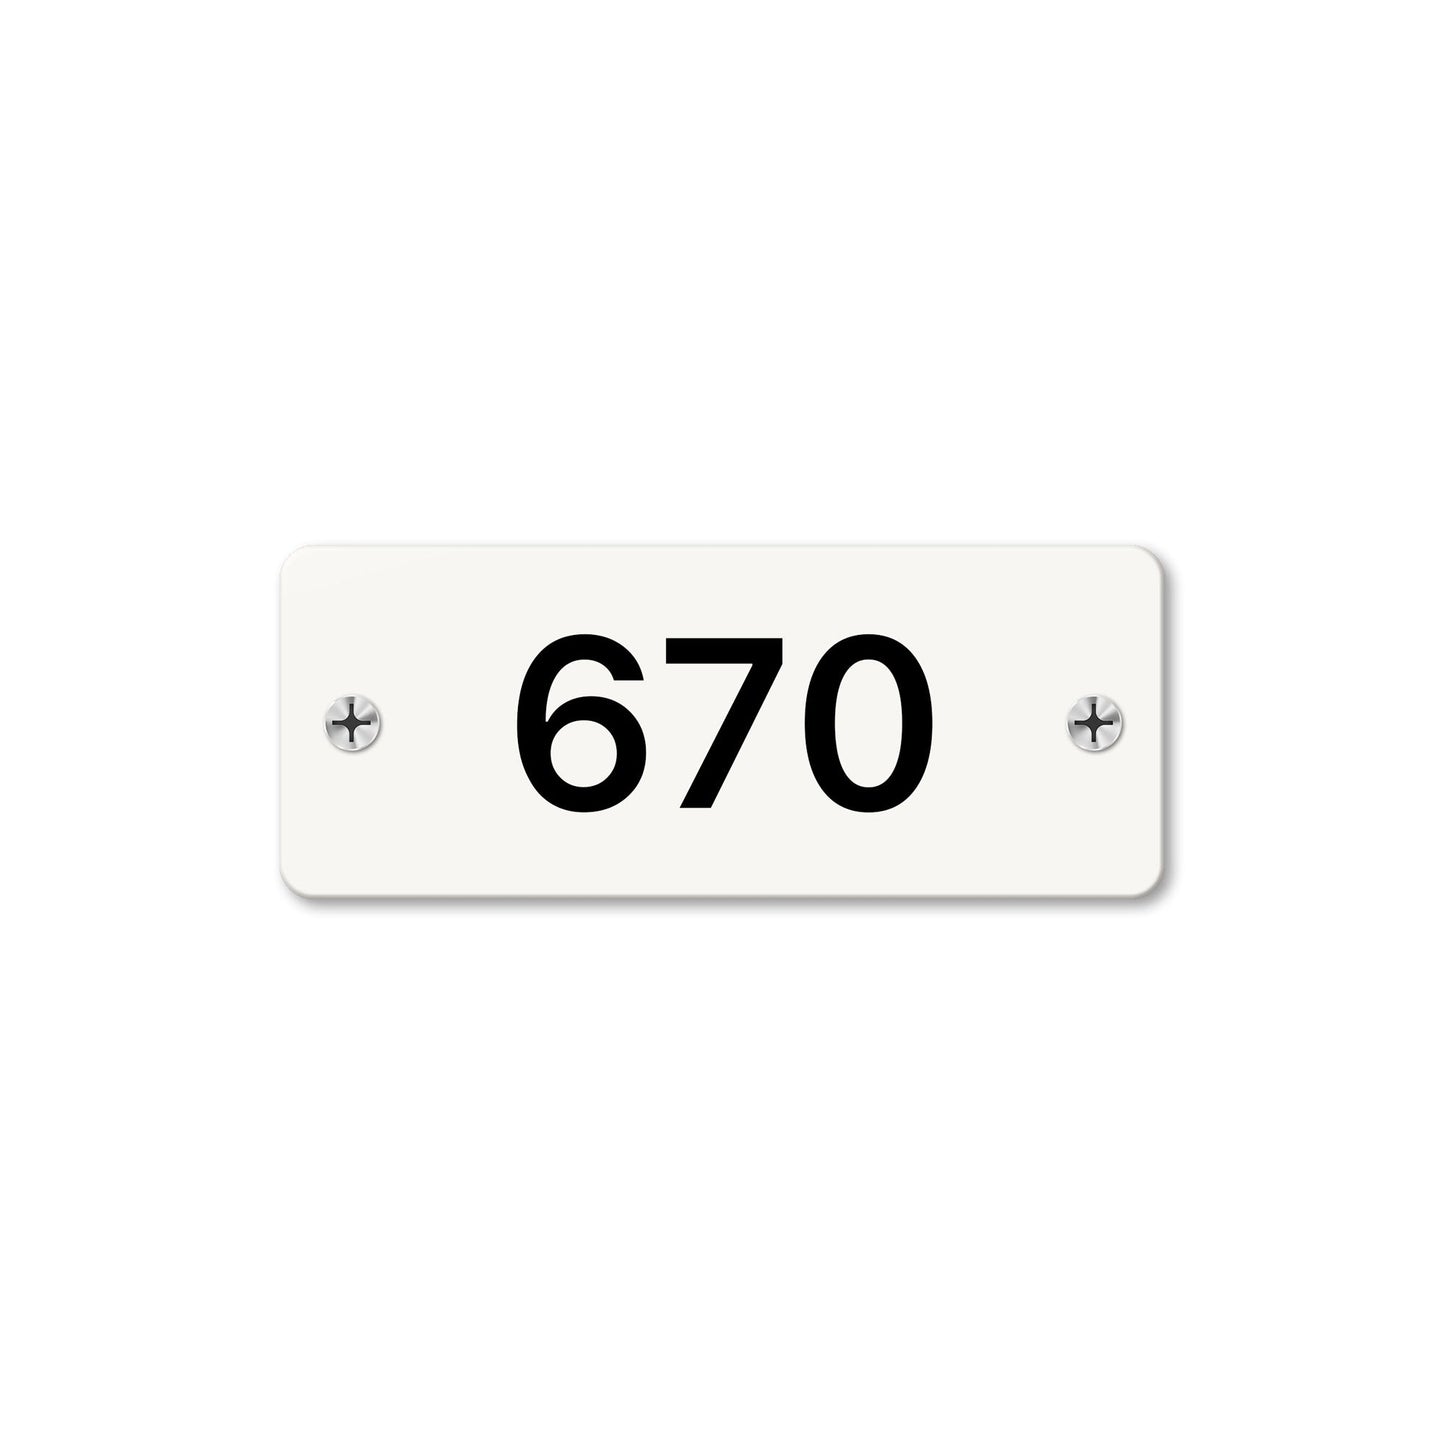 Numeral 670